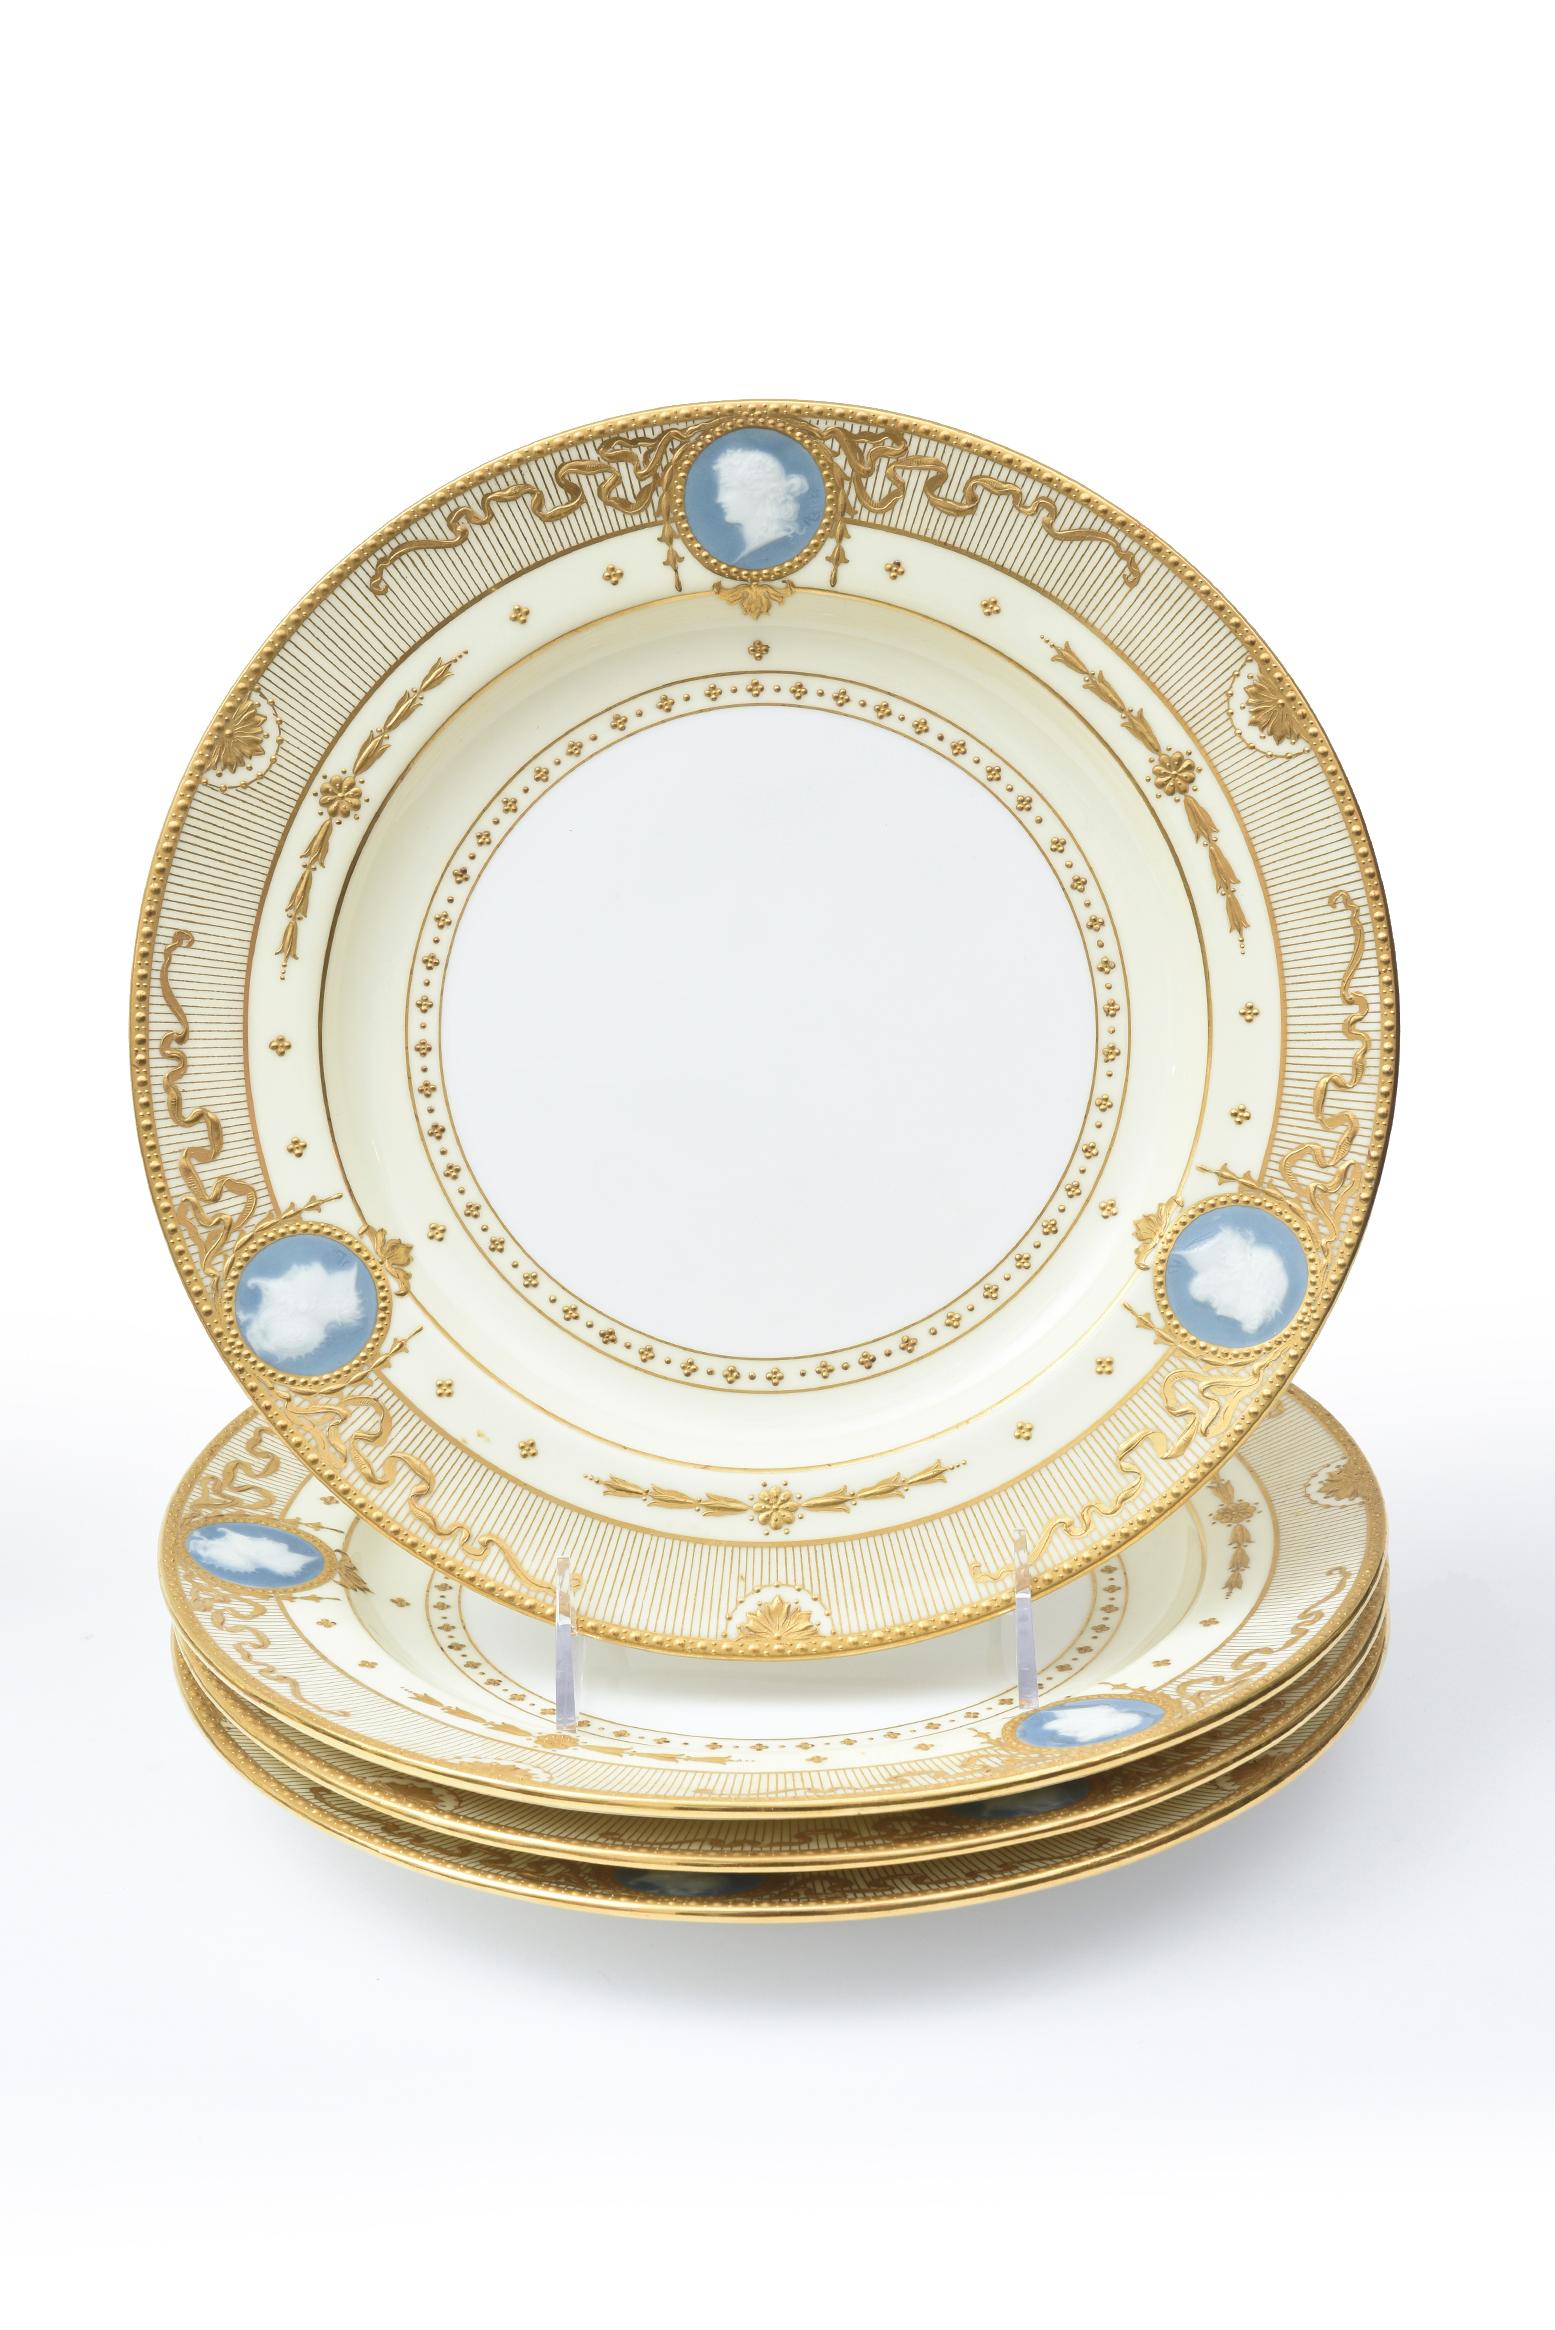 An elegant and wonderful find featuring the pinnacle of porcelain artistry. This complete set of 12 Minton, England Pâte-sur-pâte dinner or presentation plates decorated by the legendary Alboin Birks dates to 1923 – the height of the Gilded Age.